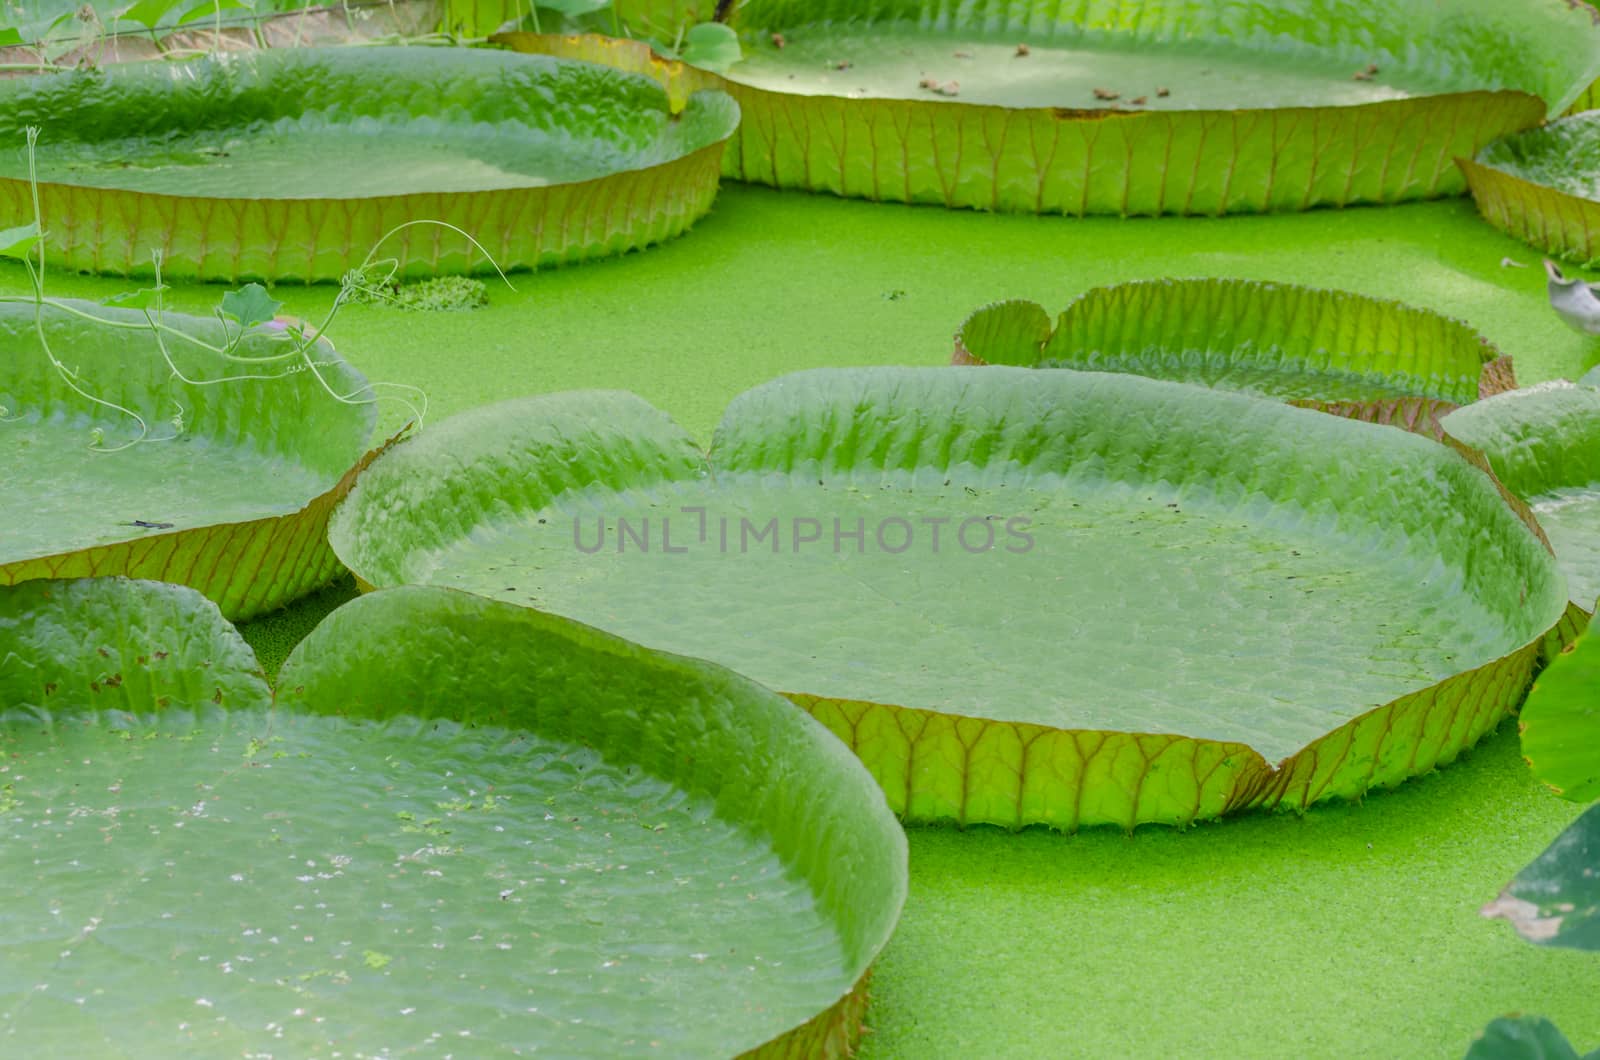 Victoria, Amazon Water Lily by JFsPic